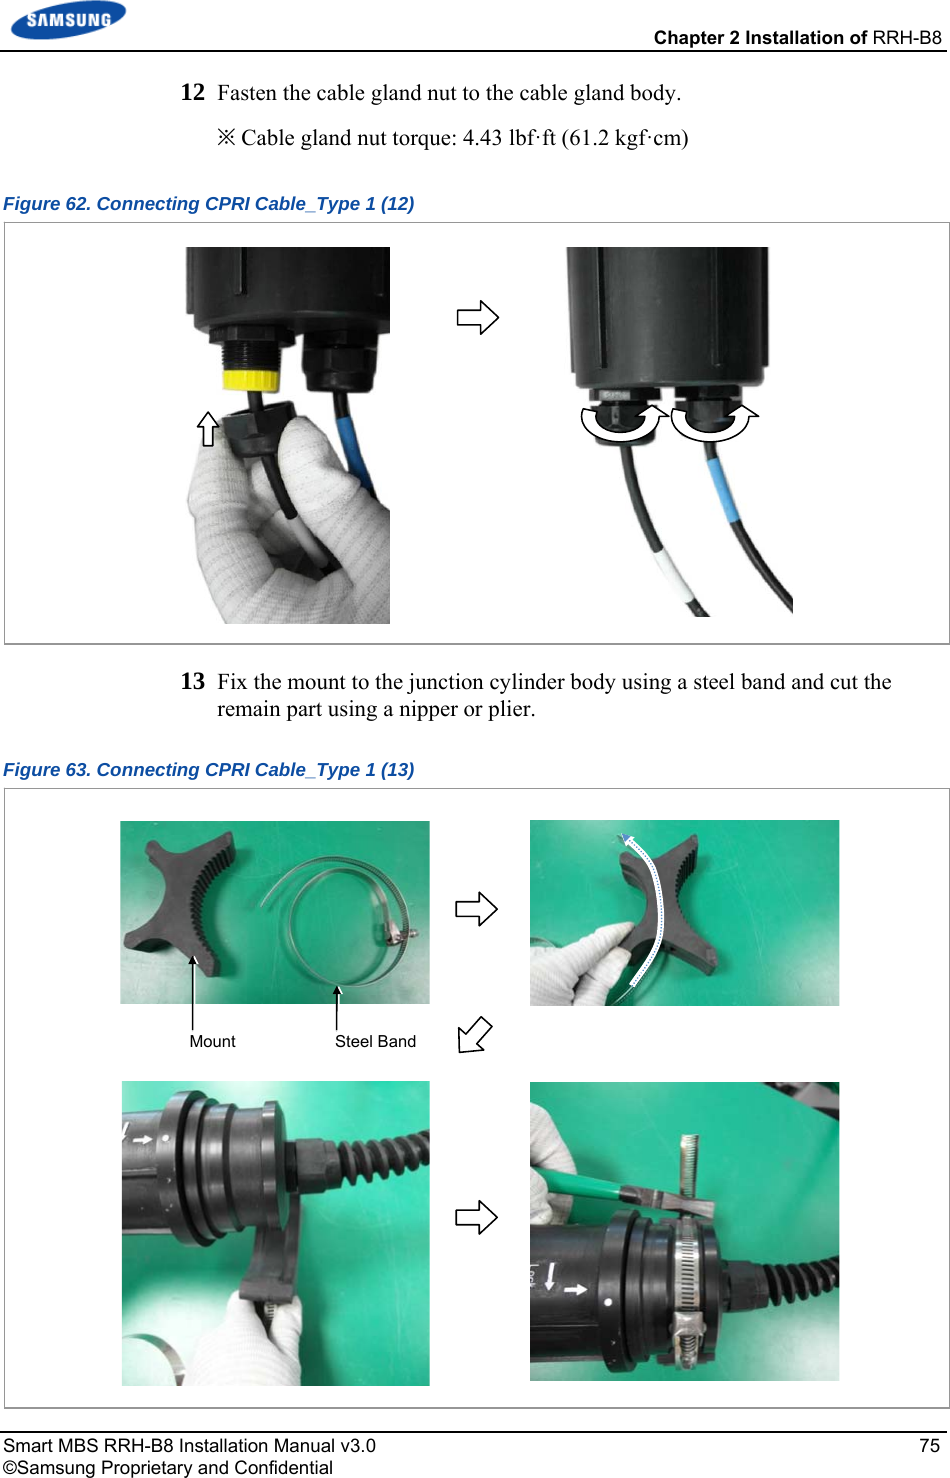  Chapter 2 Installation of RRH-B8 Smart MBS RRH-B8 Installation Manual v3.0   75 ©Samsung Proprietary and Confidential 12  Fasten the cable gland nut to the cable gland body. ※ Cable gland nut torque: 4.43 lbf·ft (61.2 kgf·cm) Figure 62. Connecting CPRI Cable_Type 1 (12)  13  Fix the mount to the junction cylinder body using a steel band and cut the remain part using a nipper or plier. Figure 63. Connecting CPRI Cable_Type 1 (13)  Mount  Steel Band